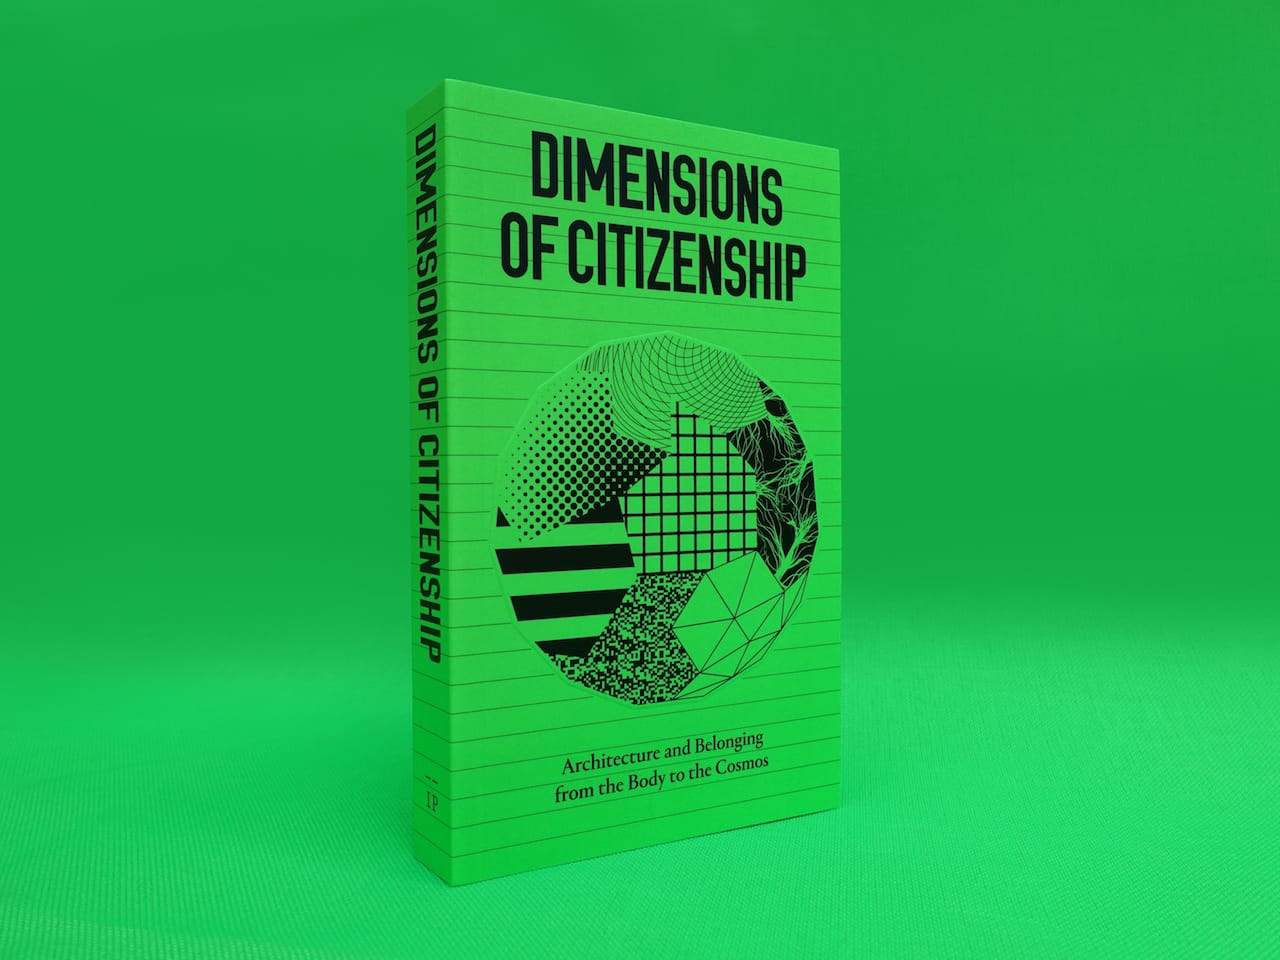 Dimensions of Citizenship book.